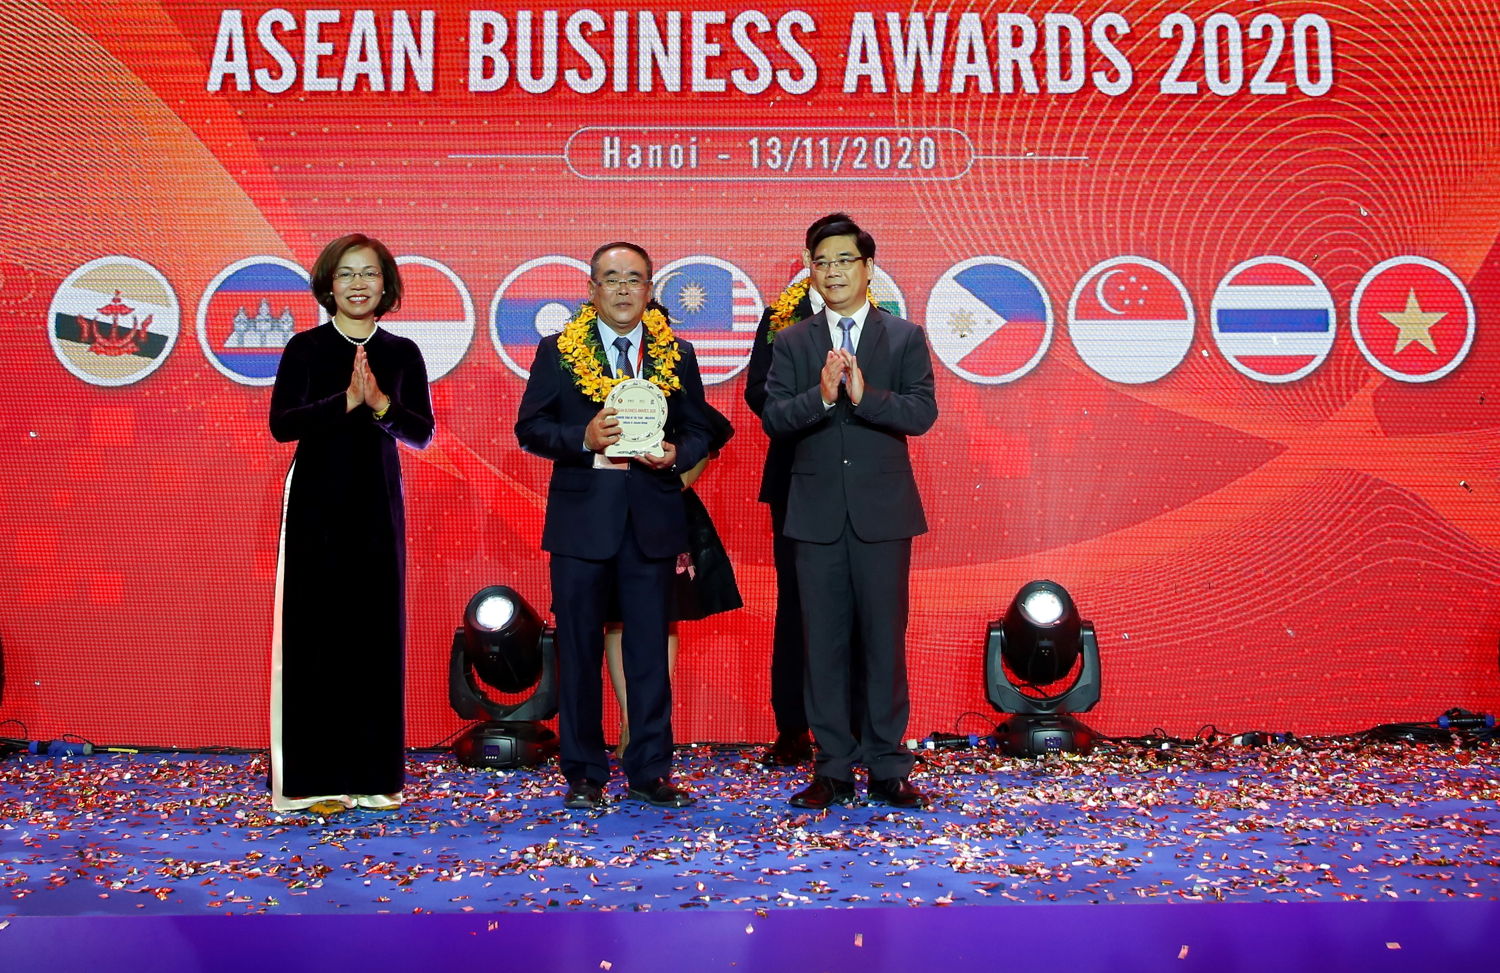 Mr. C. J. Loh, General Director of Jebsen & Jessen Packaging in Vietnam accepting the award on behalf of the Group.